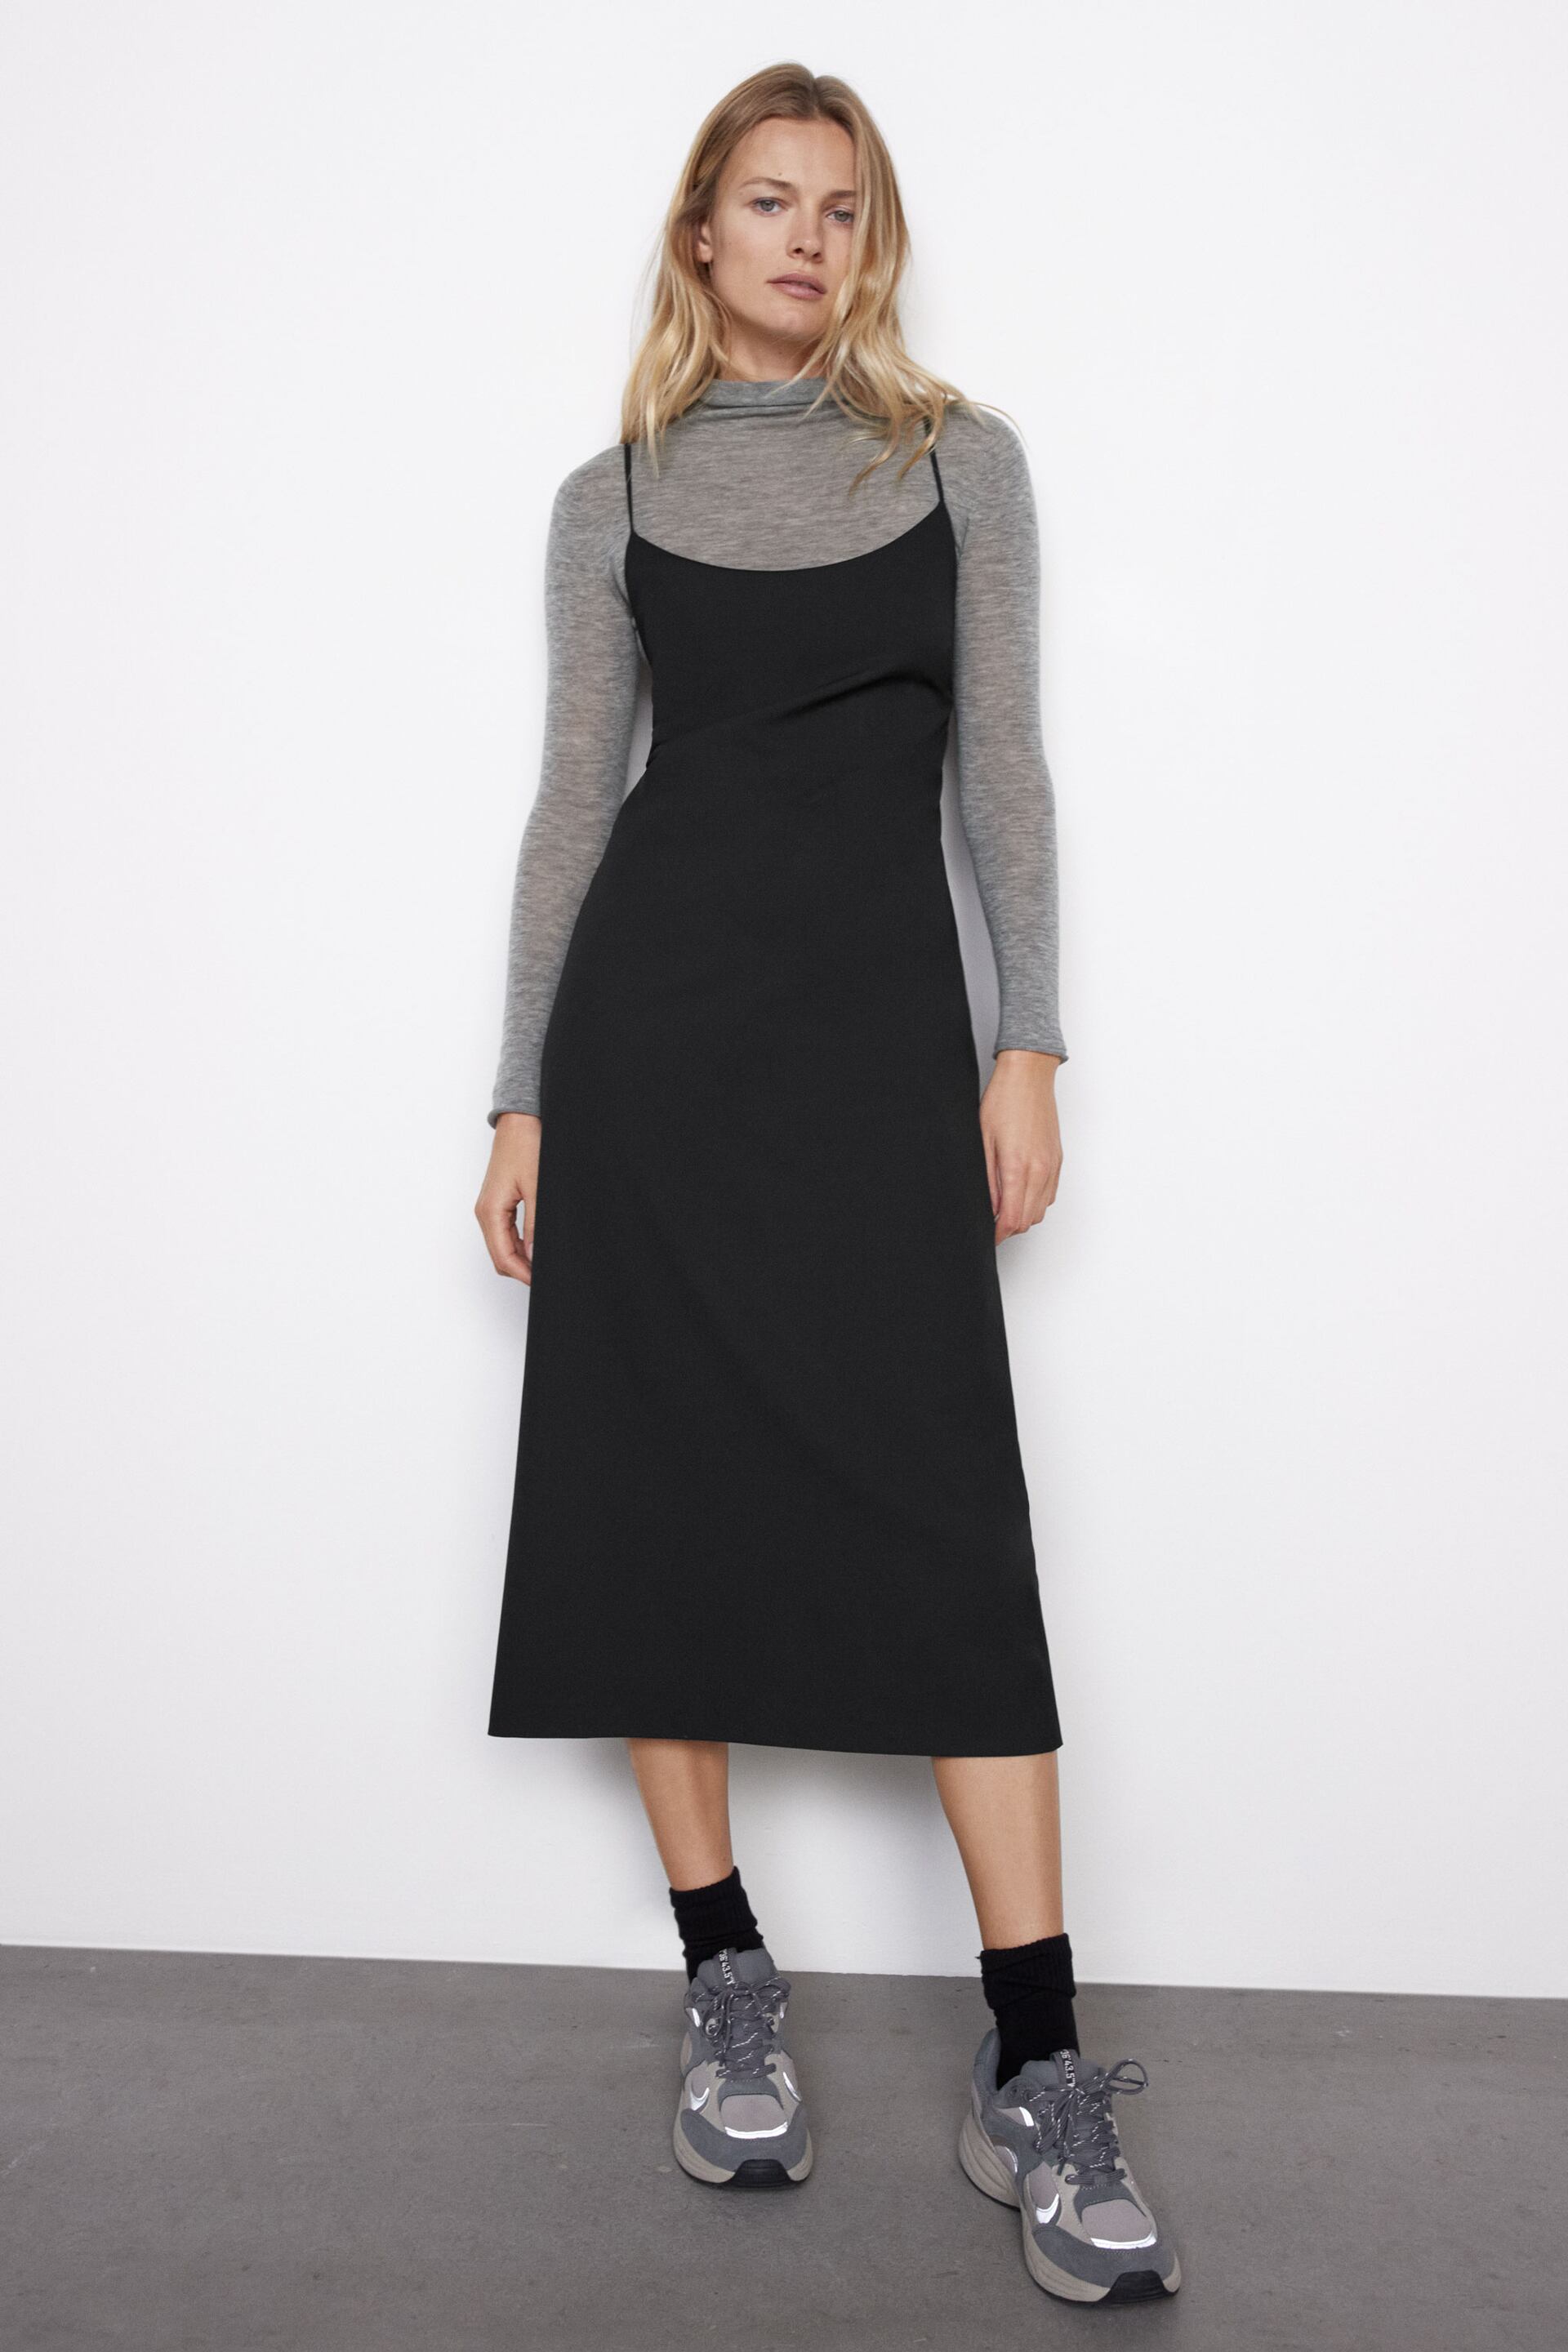 Our Selection Of The Best Winter Dresses Of 2020. Limited Edition Dress from Zara